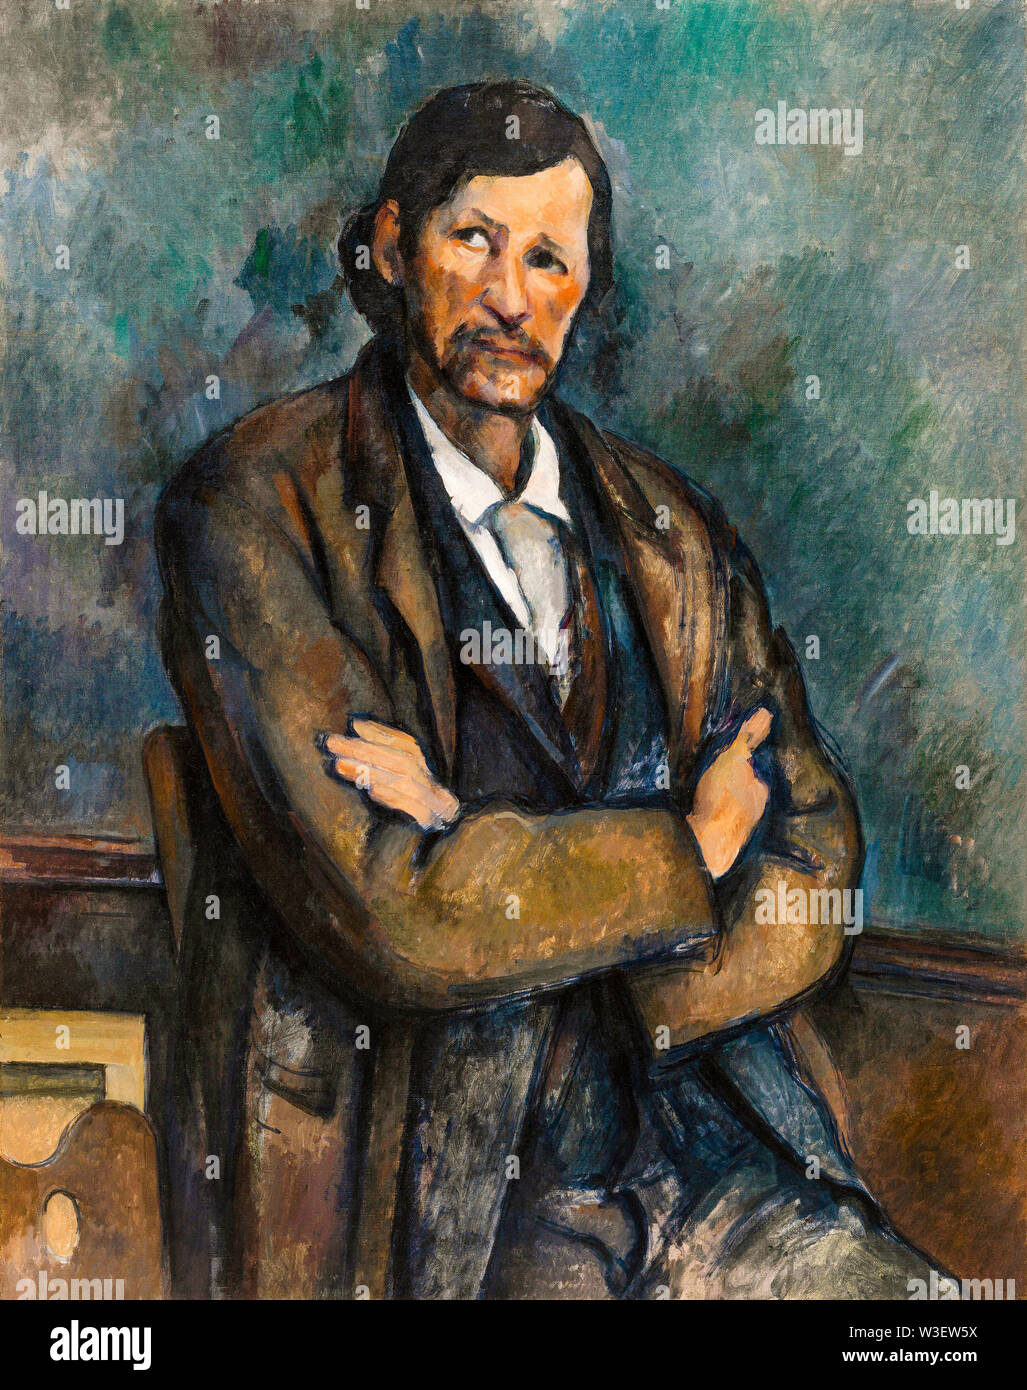 Paul Cézanne, Man With Crossed Arms, portrait painting, circa 1899 Stock Photo